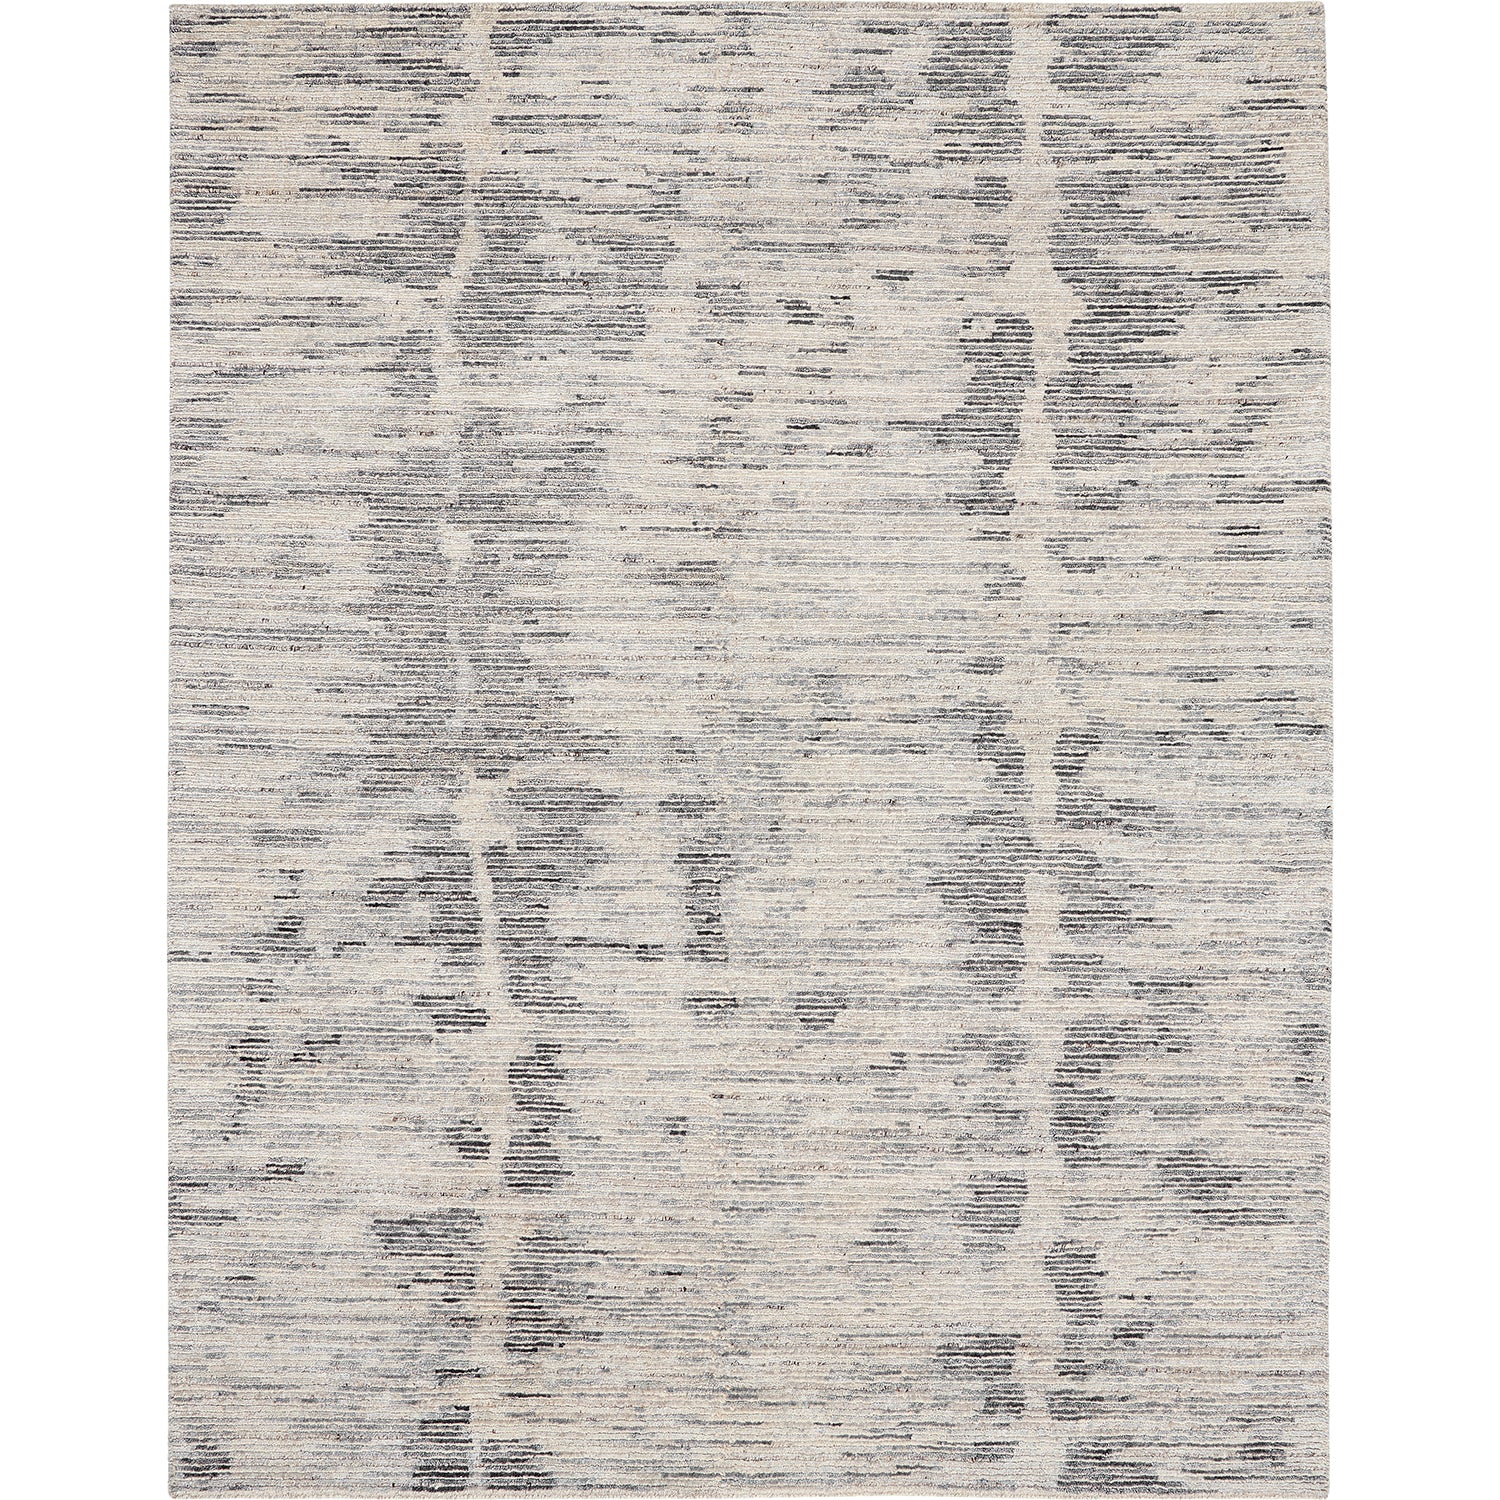 Contemporary rug with abstract design in grey and white tones.